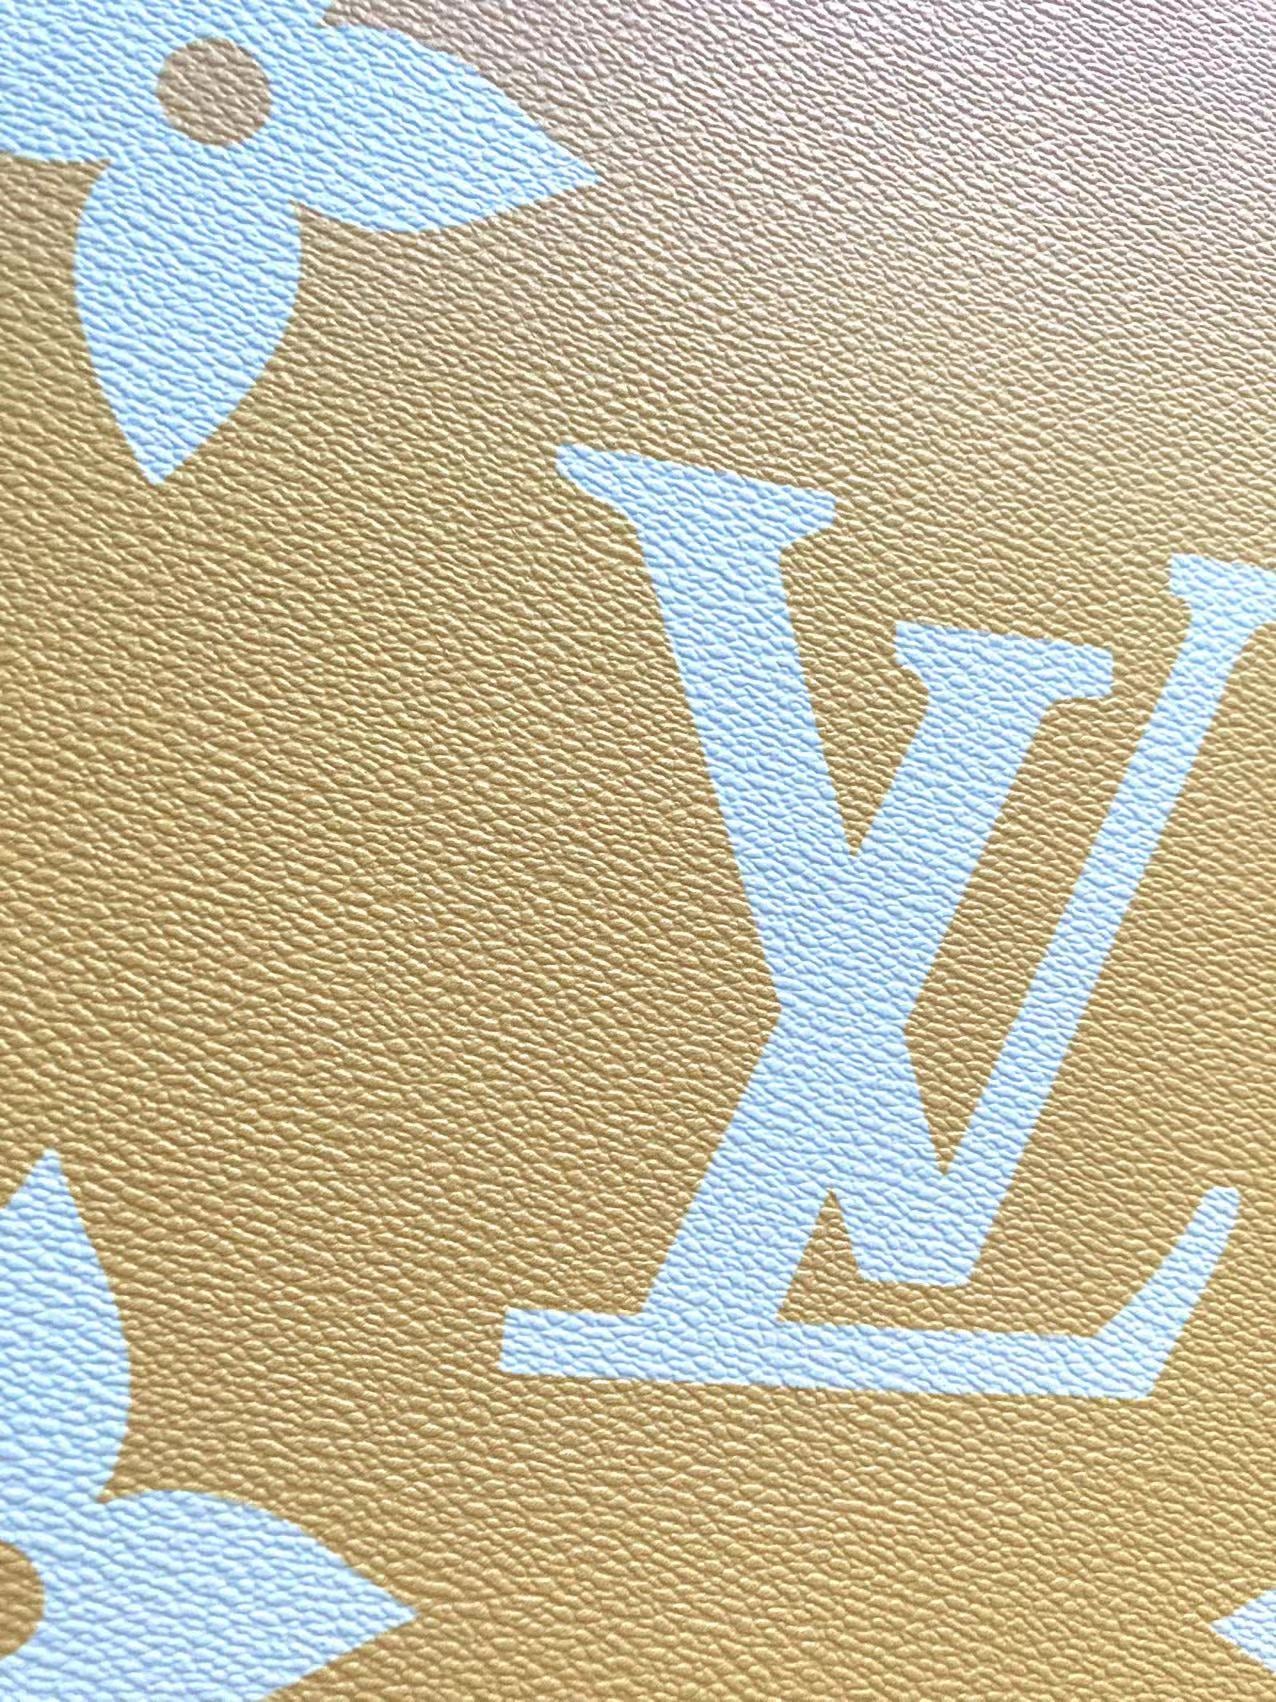 Colorful LV By the Pool Leather Fabric for Bag Custom